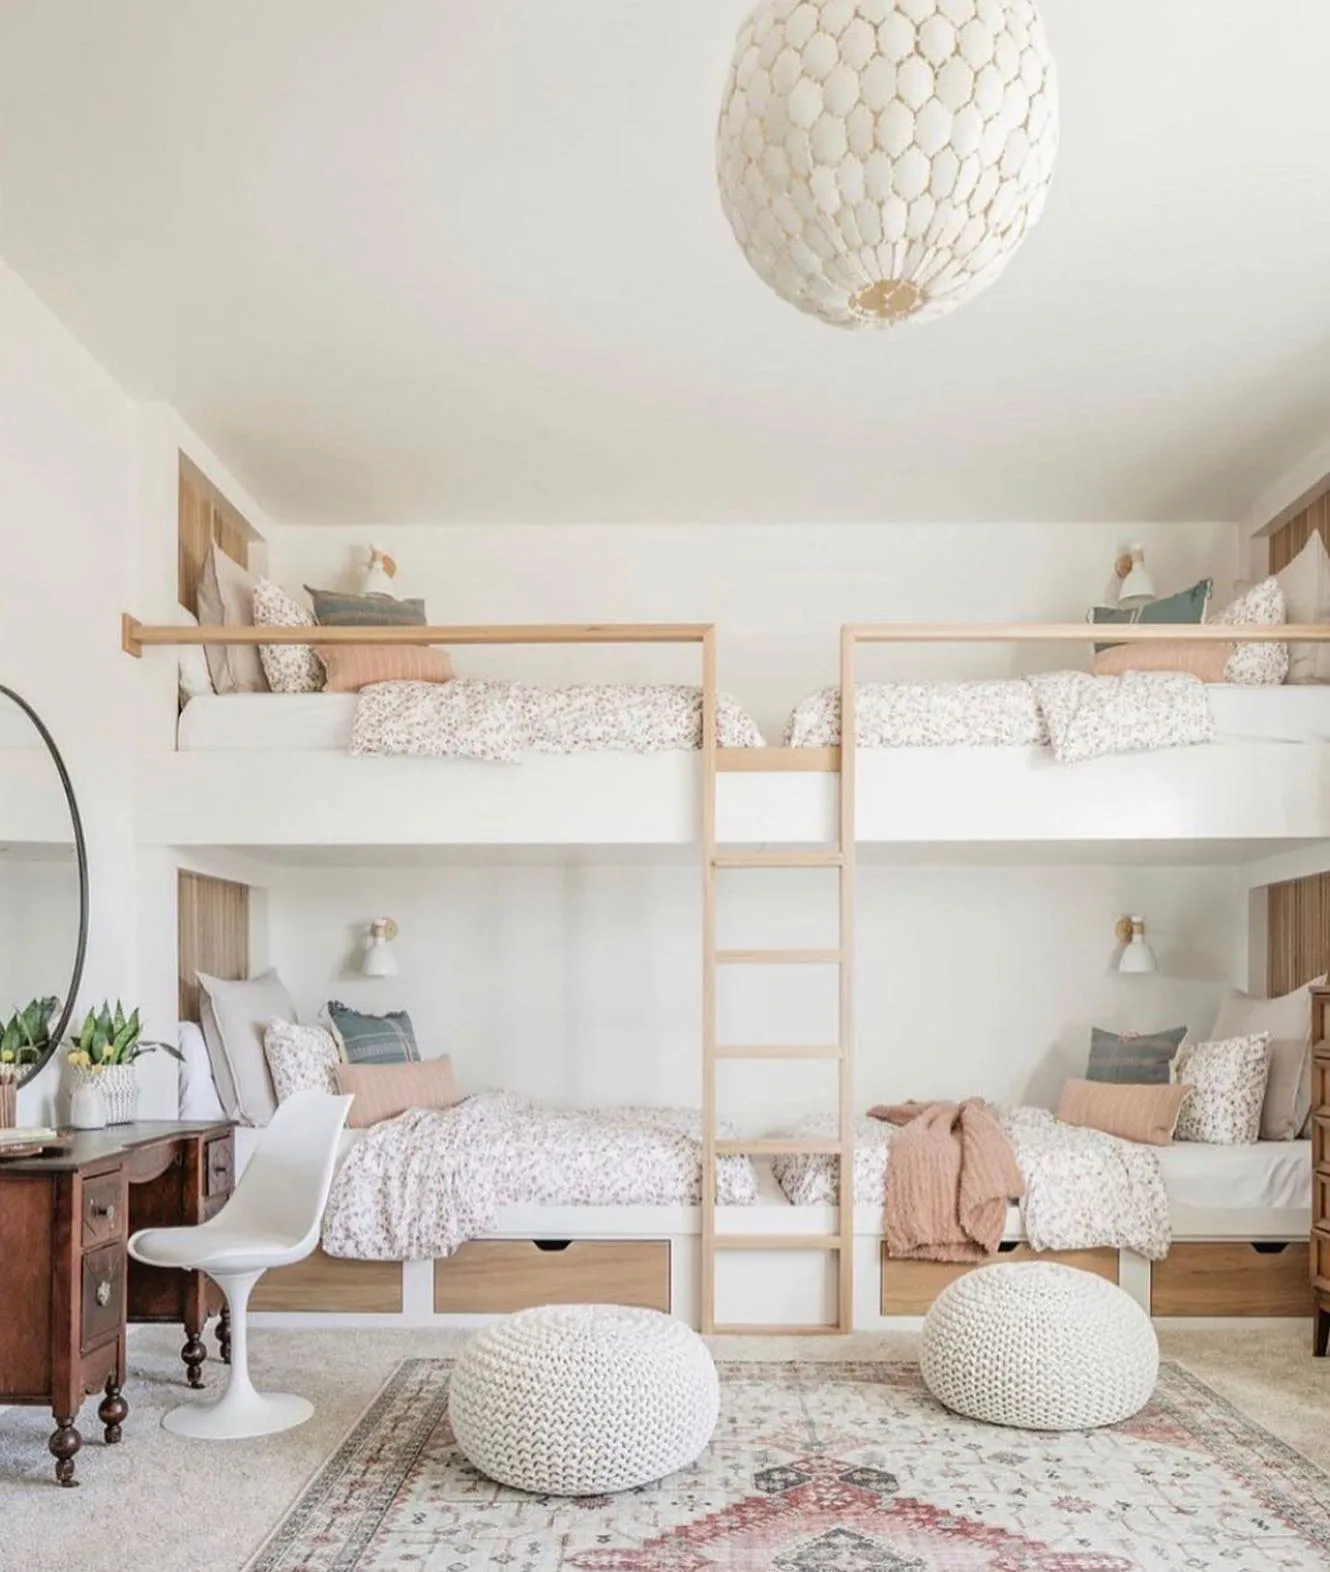 Built In Bunk Bed Design With Wood Accents